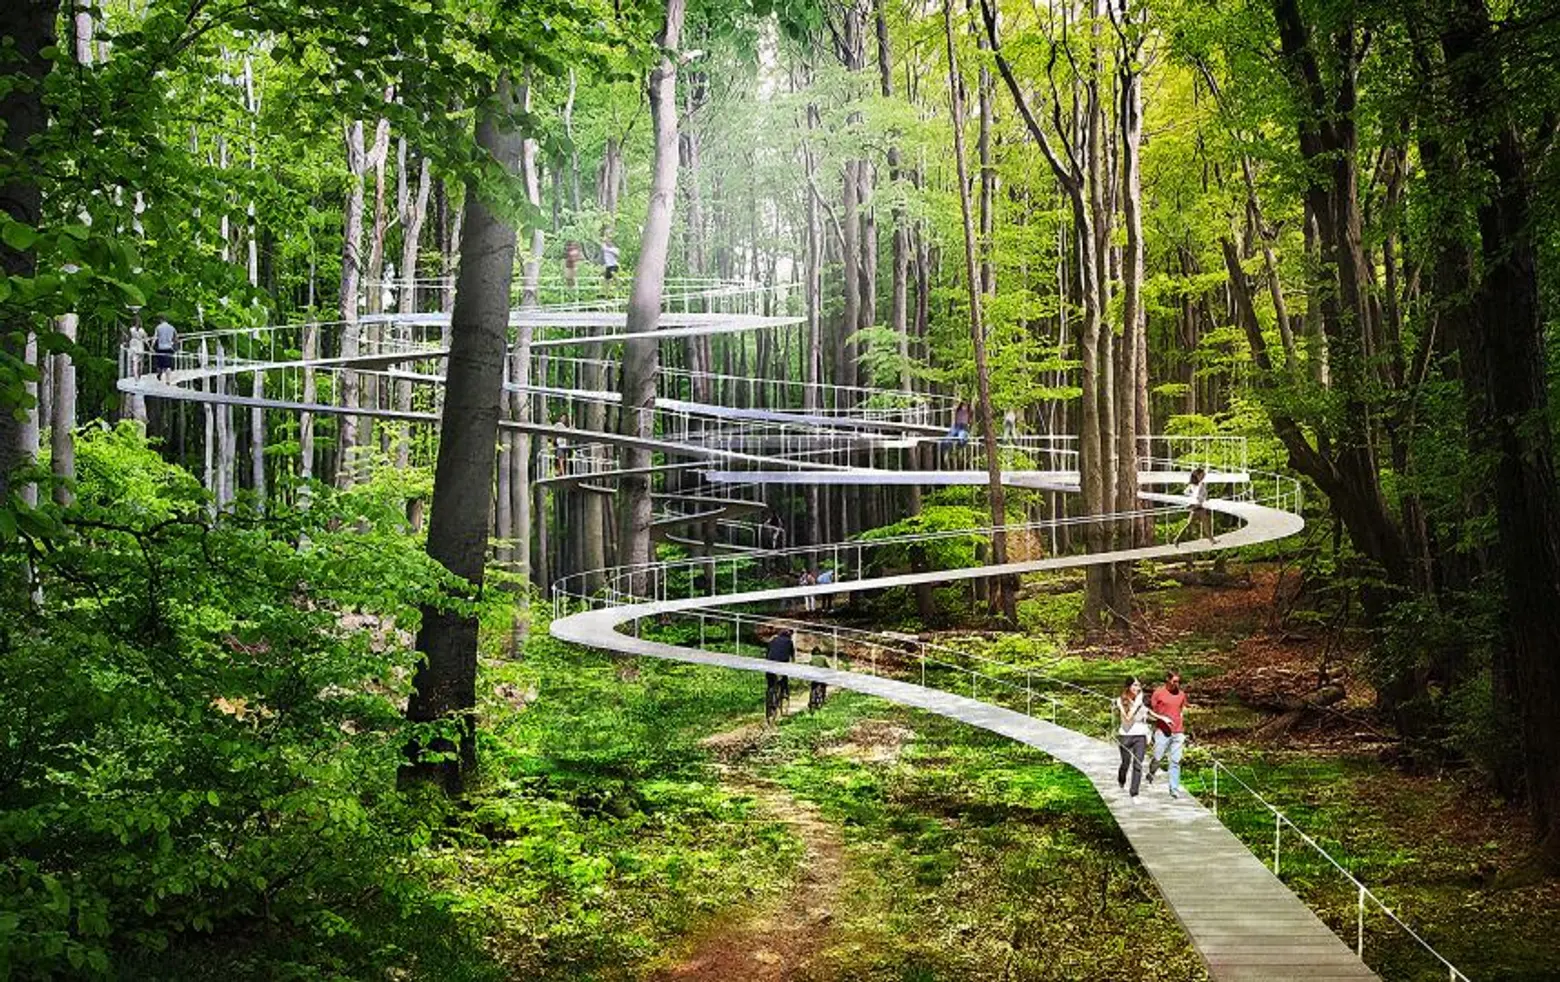 NYC design firm Dror designs a walkway that winds through the forest